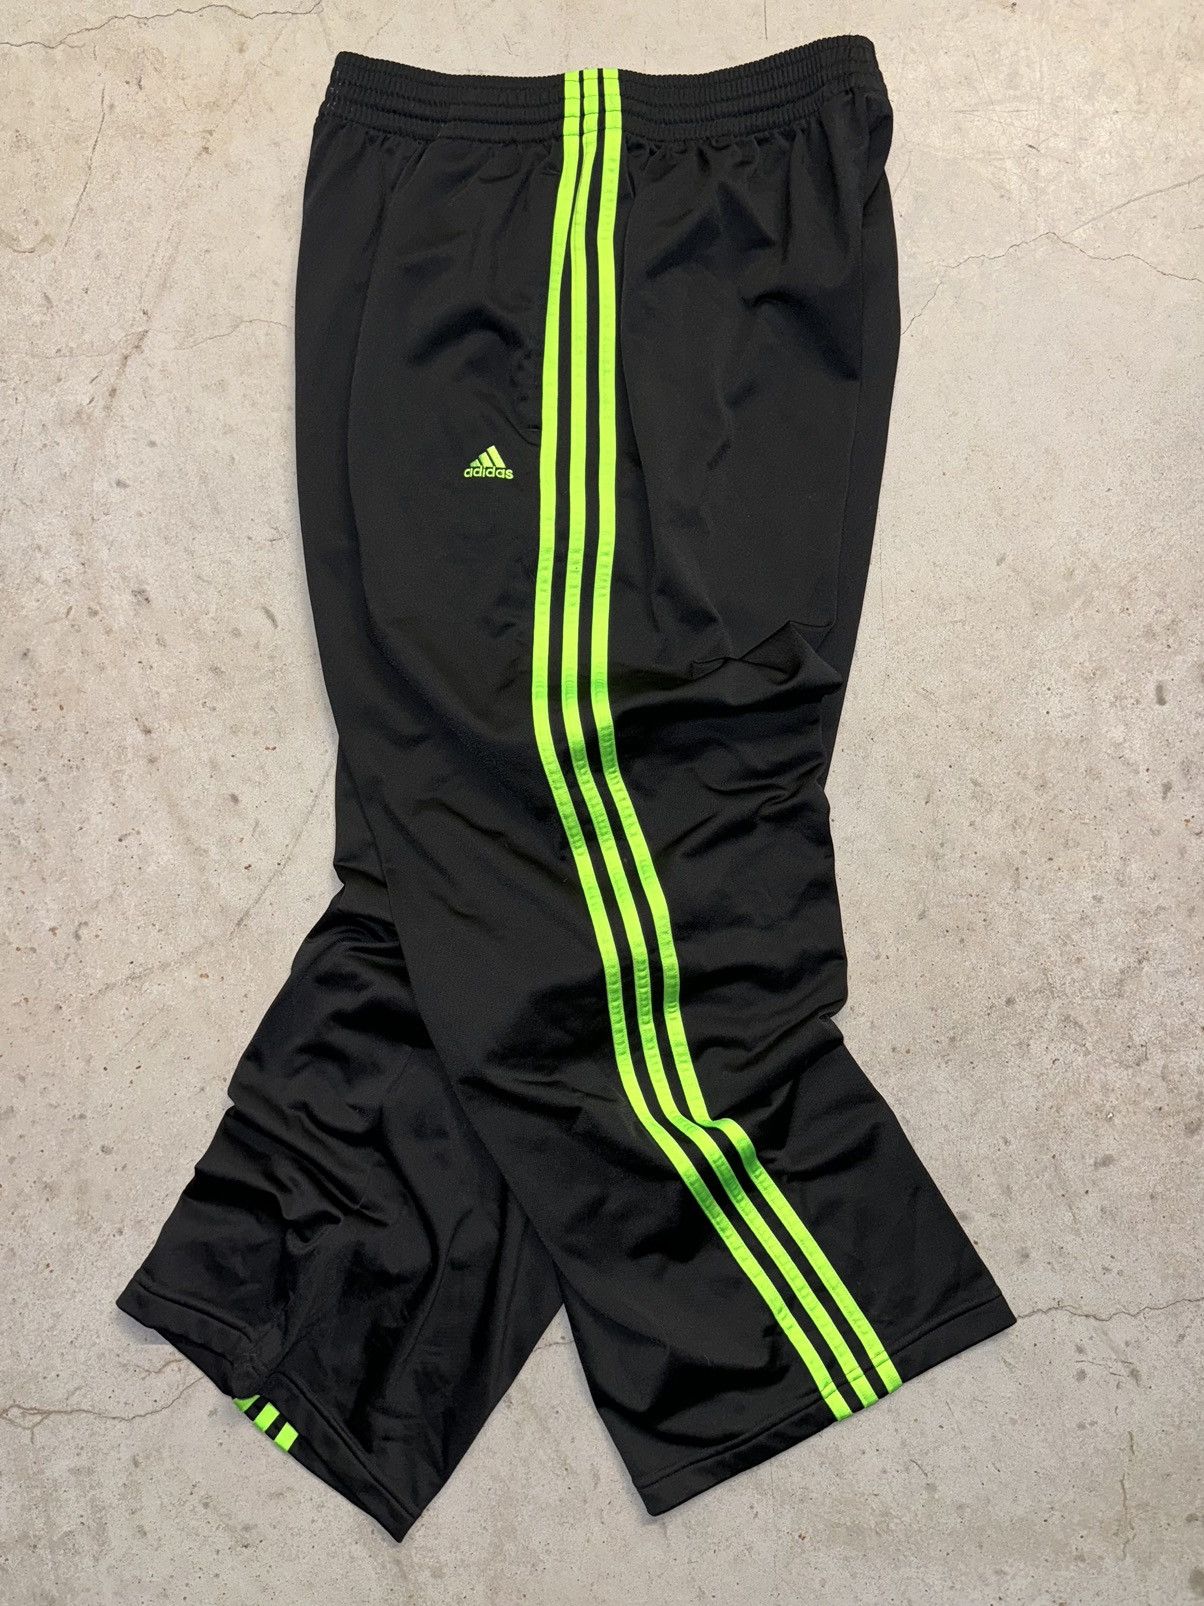 Adidas Crazy Vintage 90s Adidas Baggy Track Pants Striped Wide Leg 